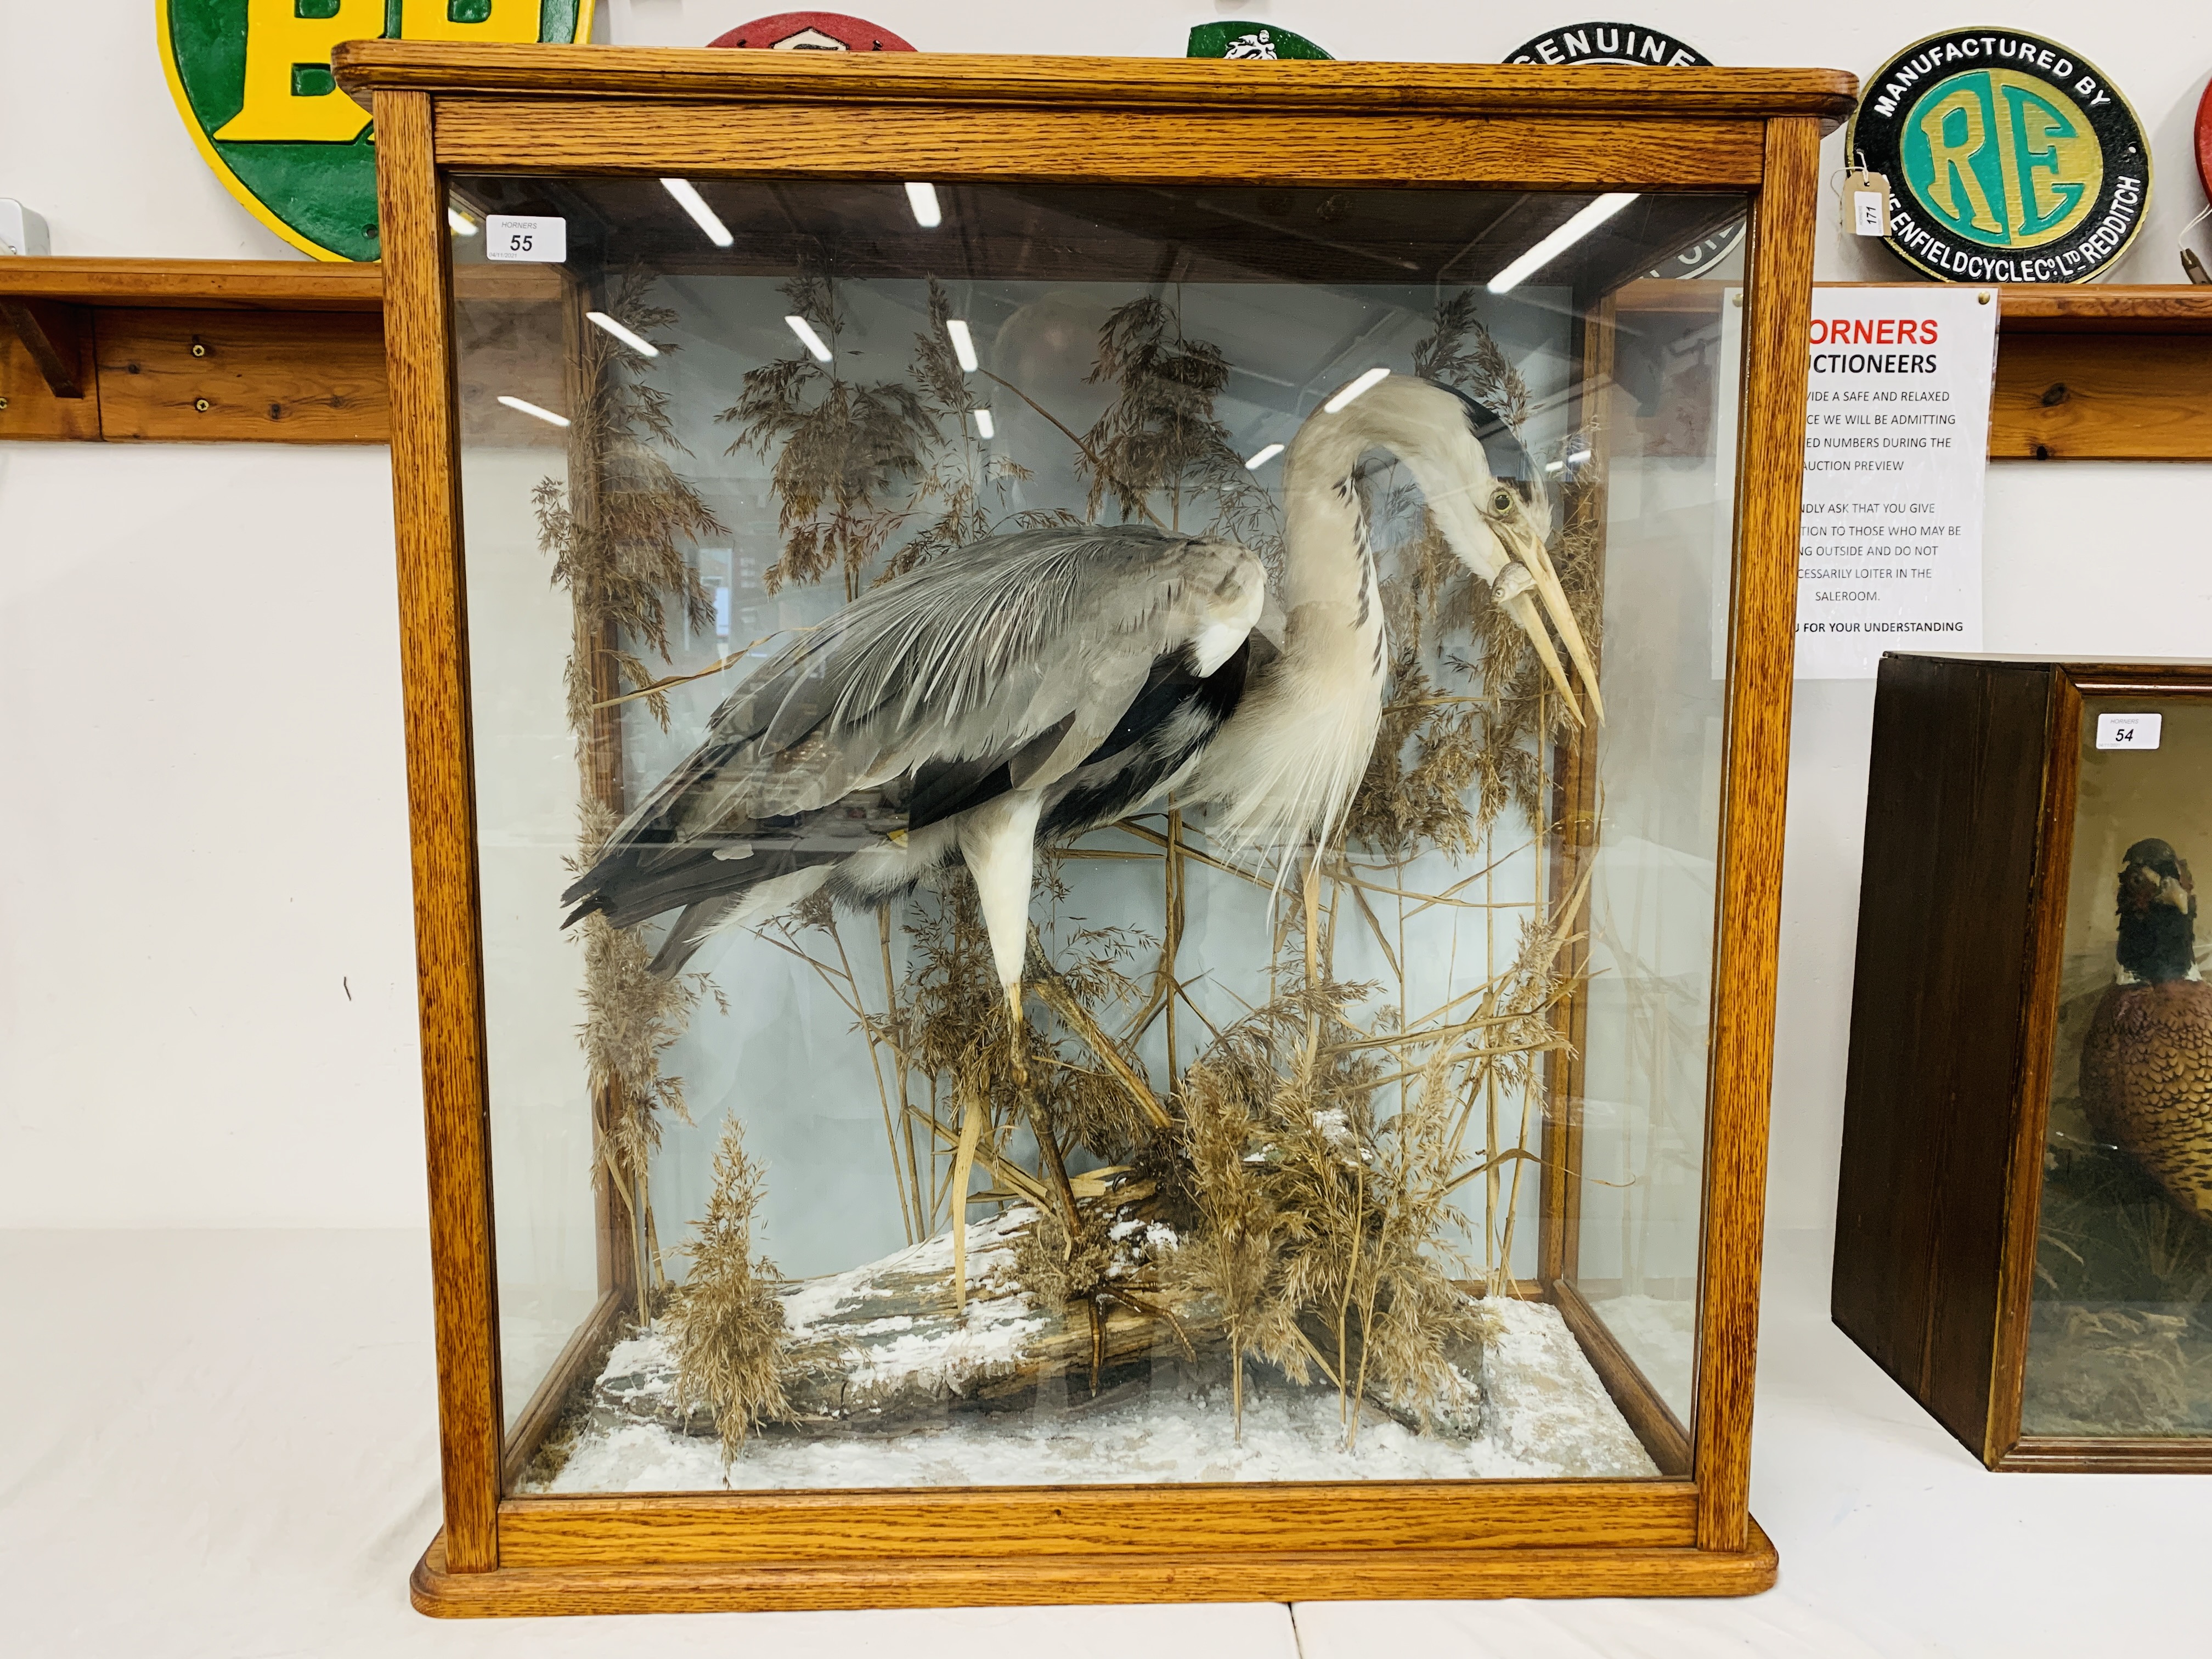 VICTORIAN TAXIDERMY STUDY OF A STANDING HERON HOLDING FISH,